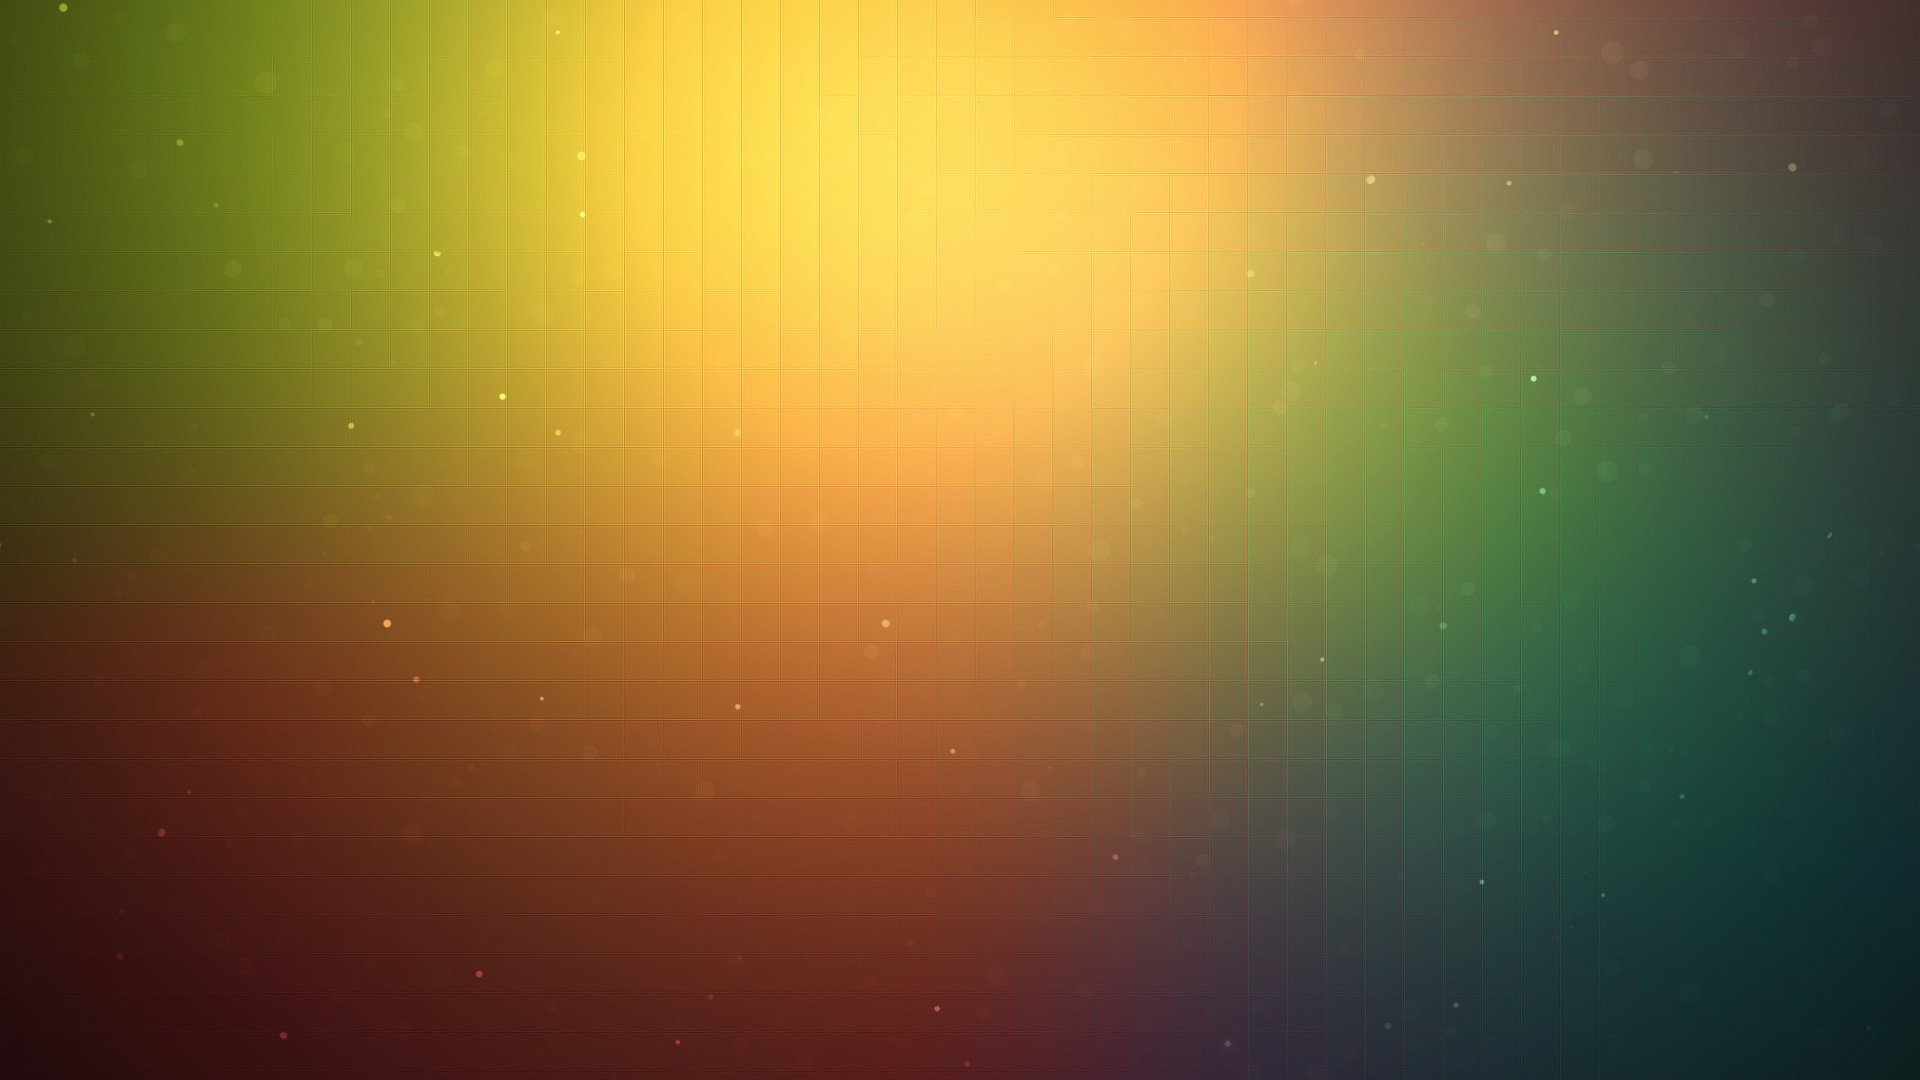 43 Plain Color Computer Wallpapers HD 4K 5K for PC and Mobile   Download free images for iPhone Android